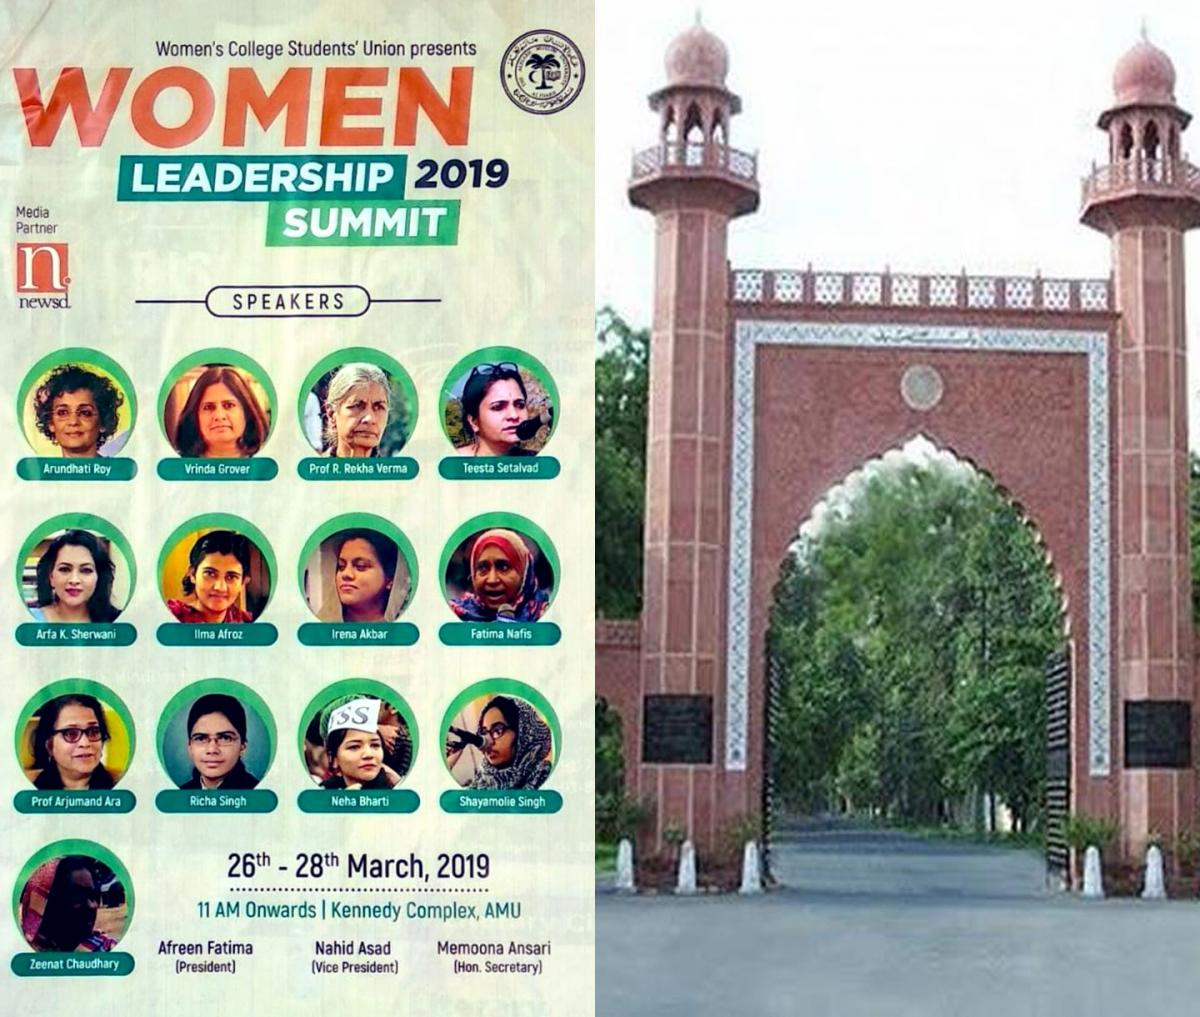 Aligarh Muslim University Girl Sex - AMU: Male Students try to Derail Feminist Event organised by Women Students  | SabrangIndia